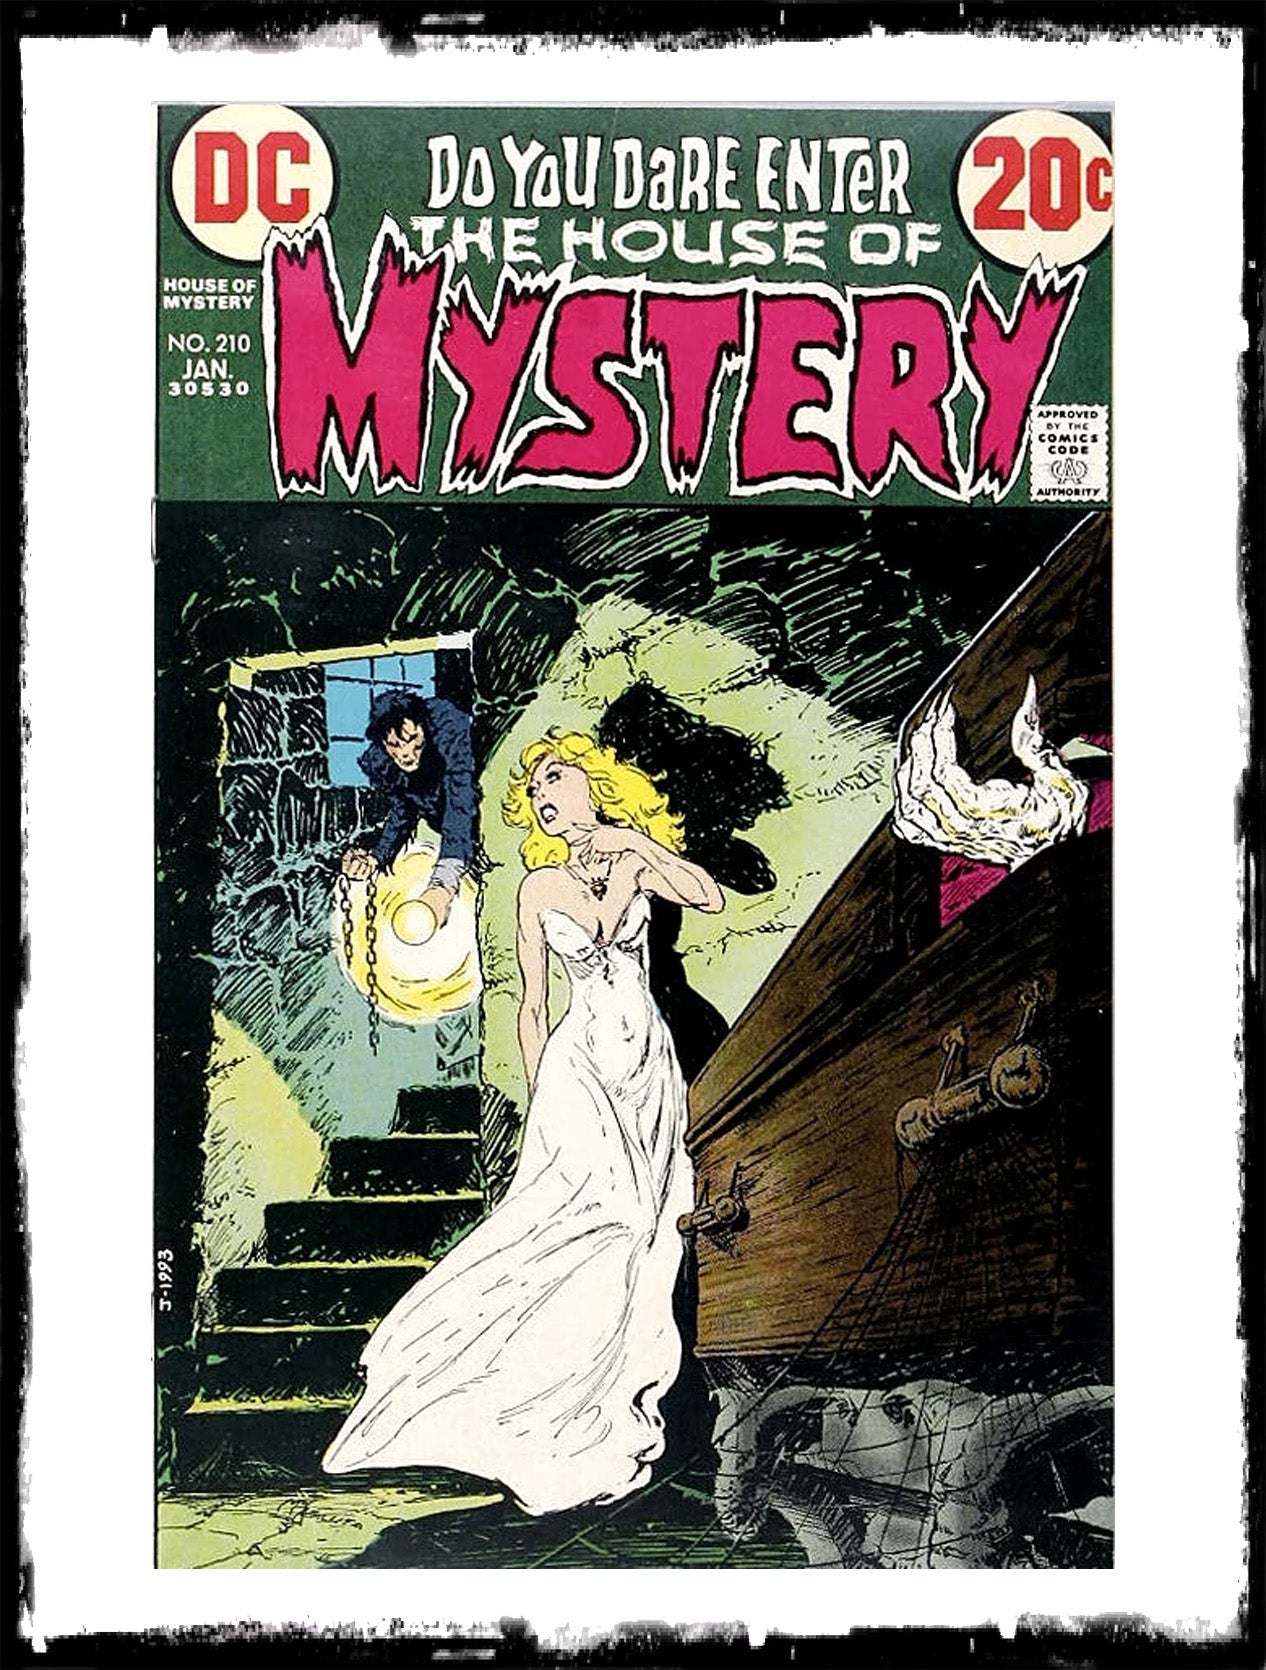 HOUSE OF MYSTERY - #210 CLASSIC DC HORROR! (1973 - VF-)